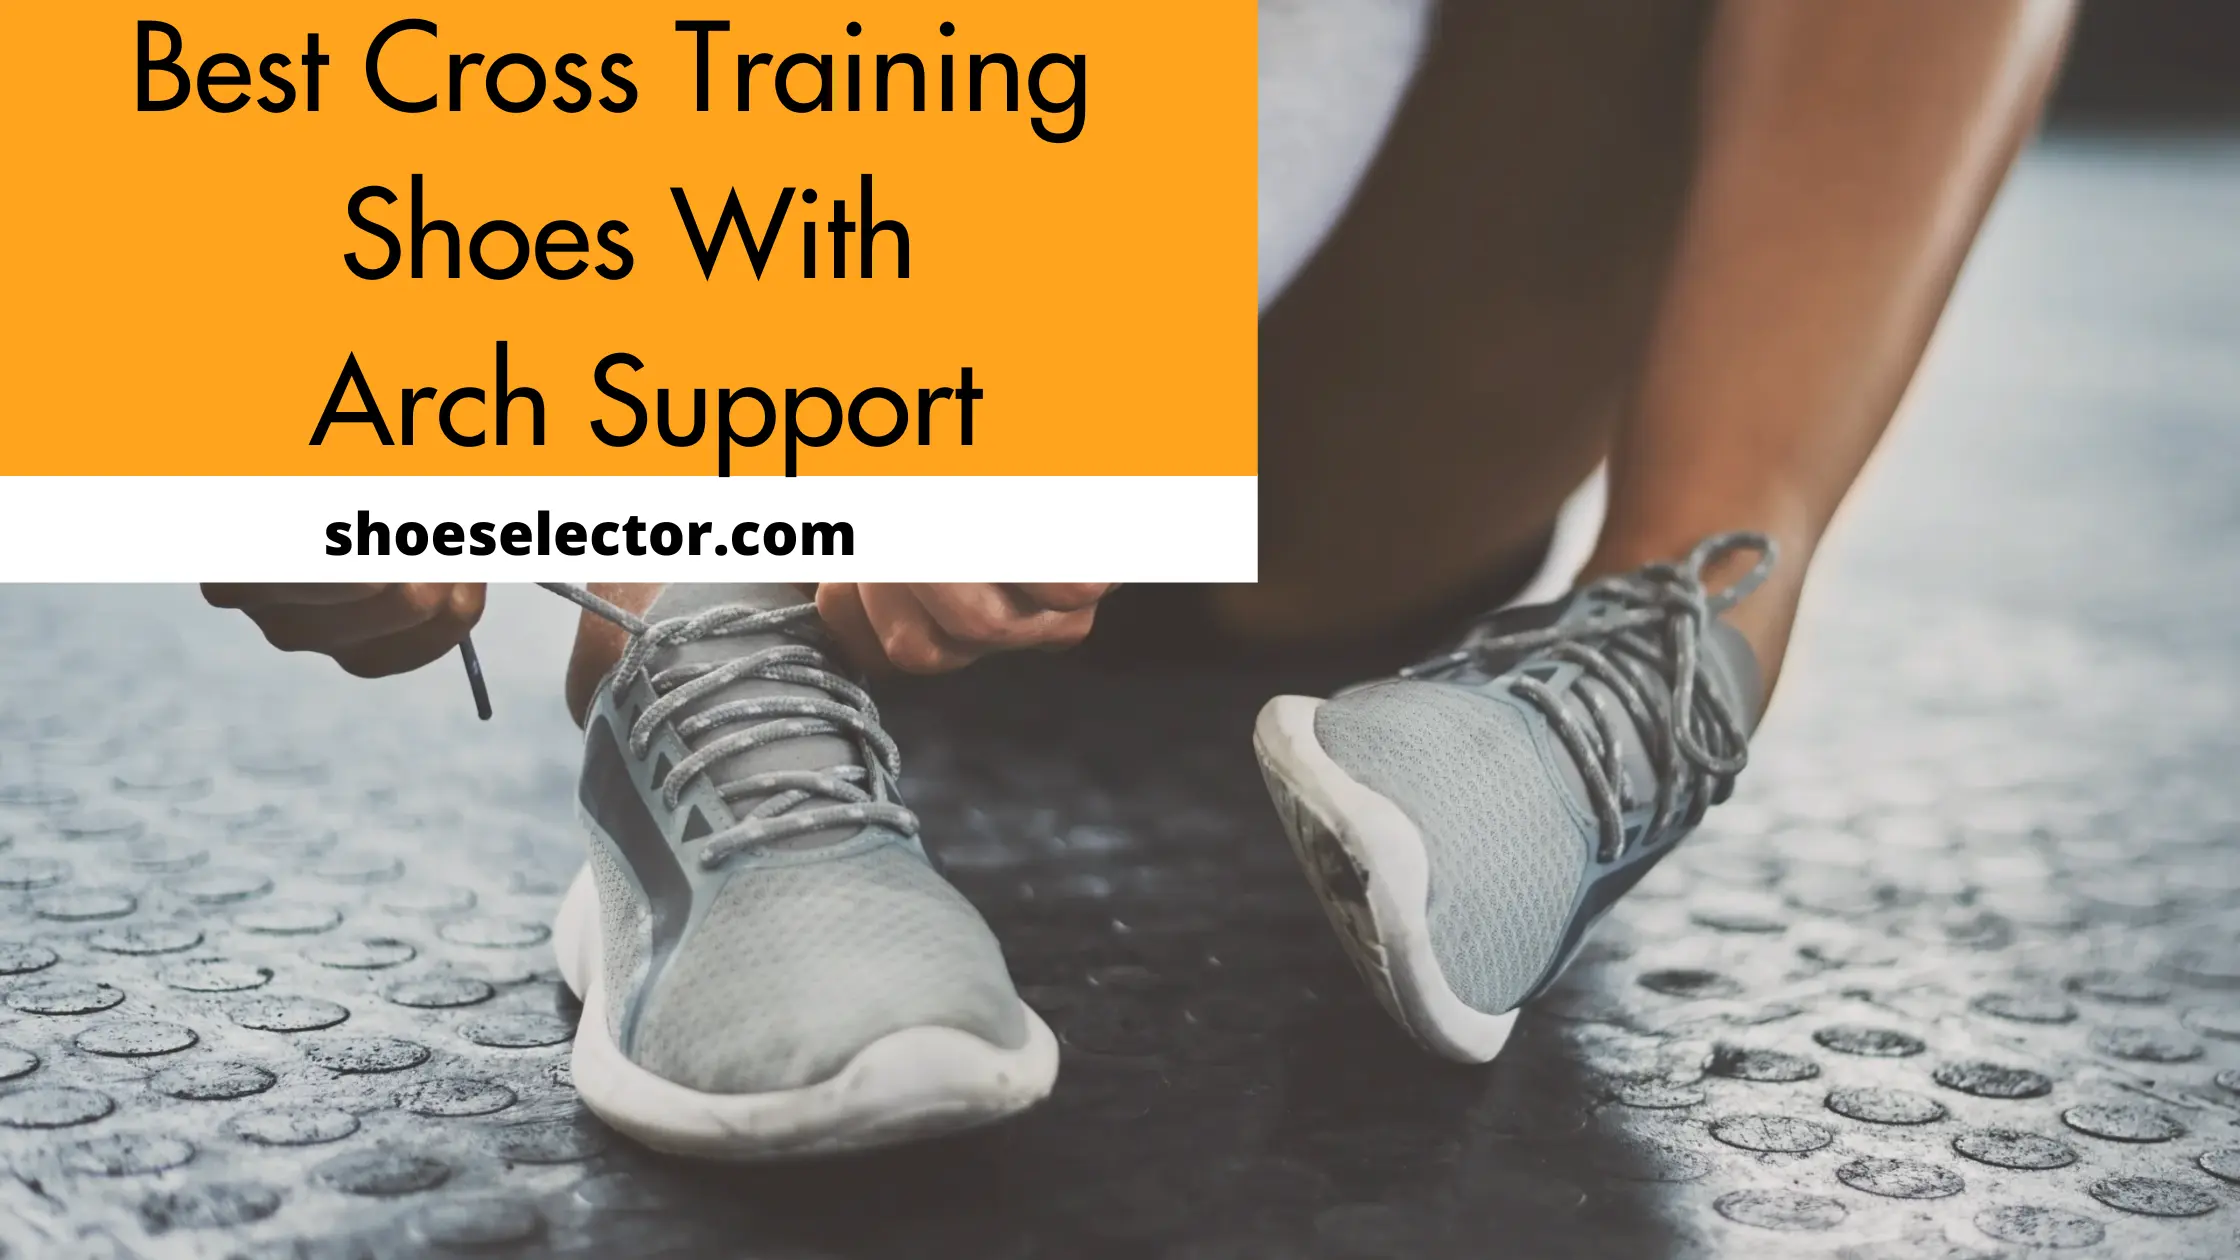 Best Cross Training Shoes With Arch Support - Expert Choice